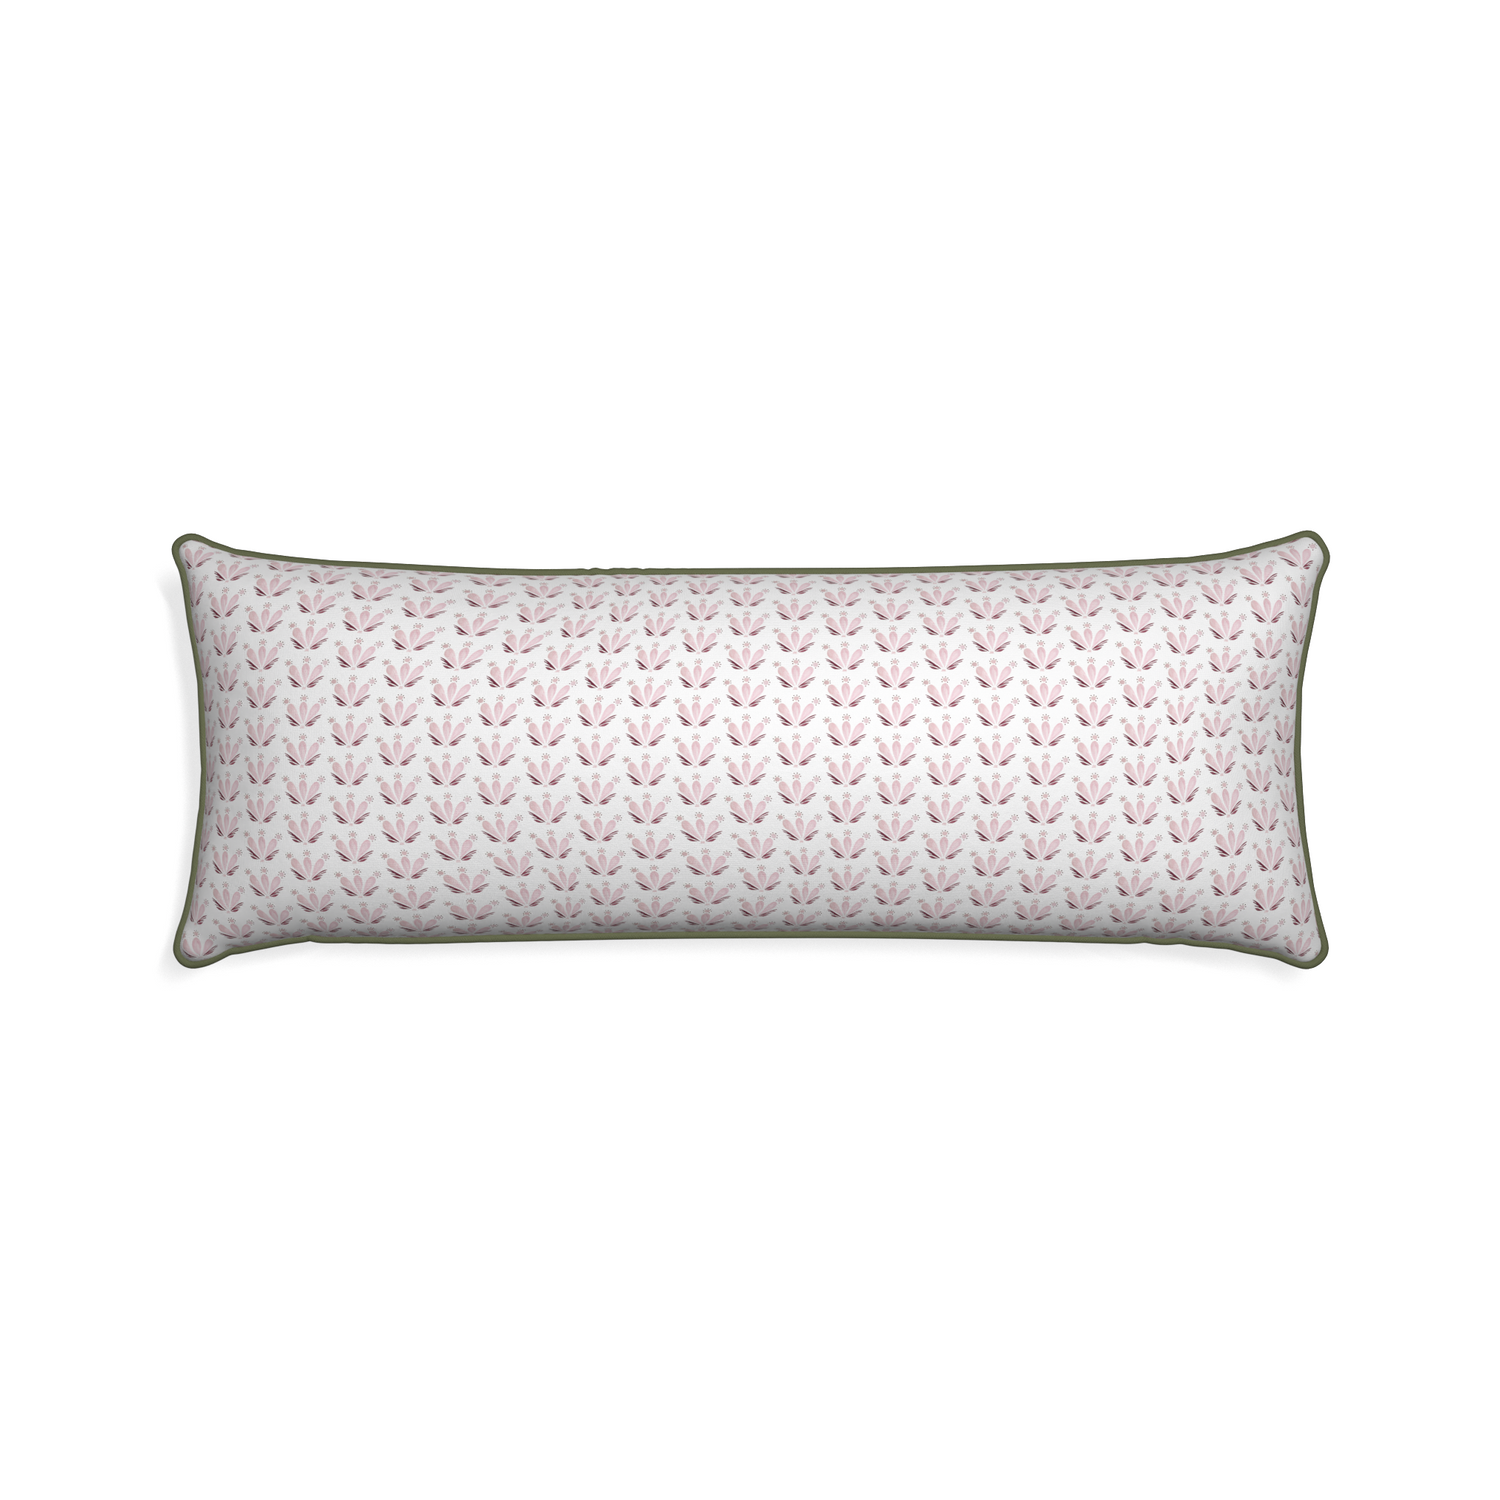 Xl-lumbar serena pink custom pink & burgundy drop repeat floralpillow with f piping on white background